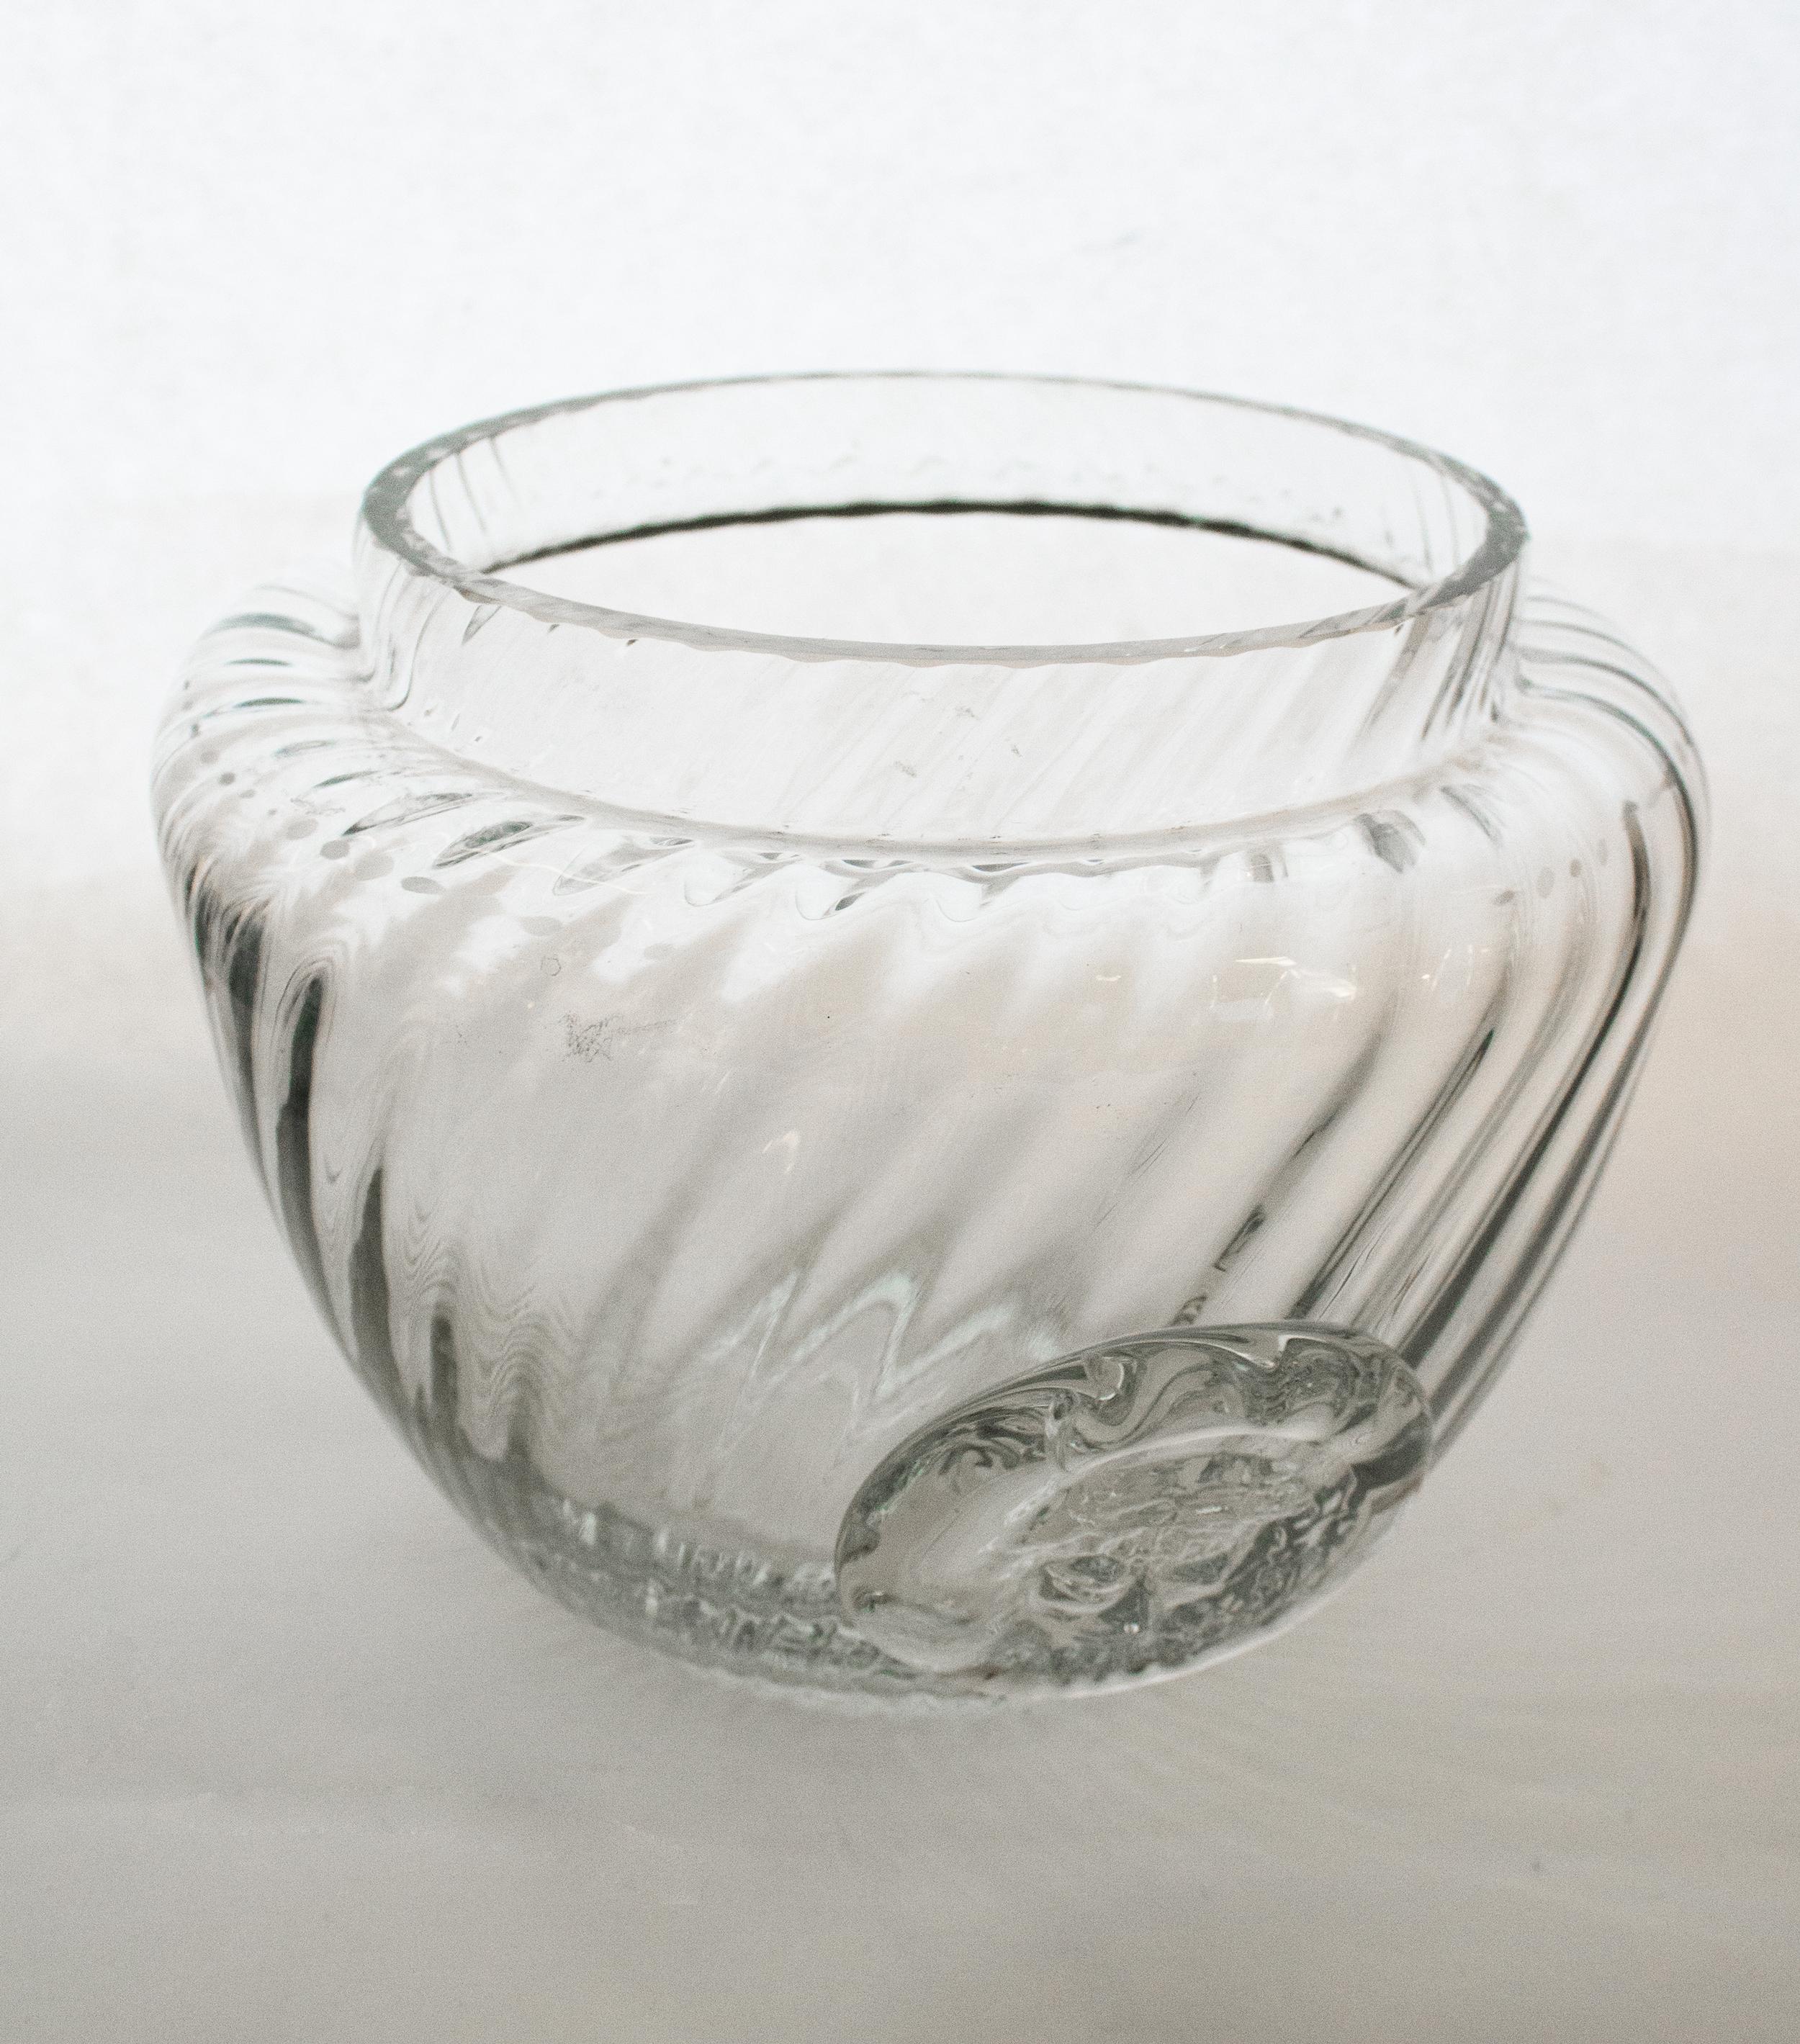 Hand-Crafted Large Turbine Glass Bowl Signed by the Swedish Glass Artist Erik Höglund, 1980 For Sale